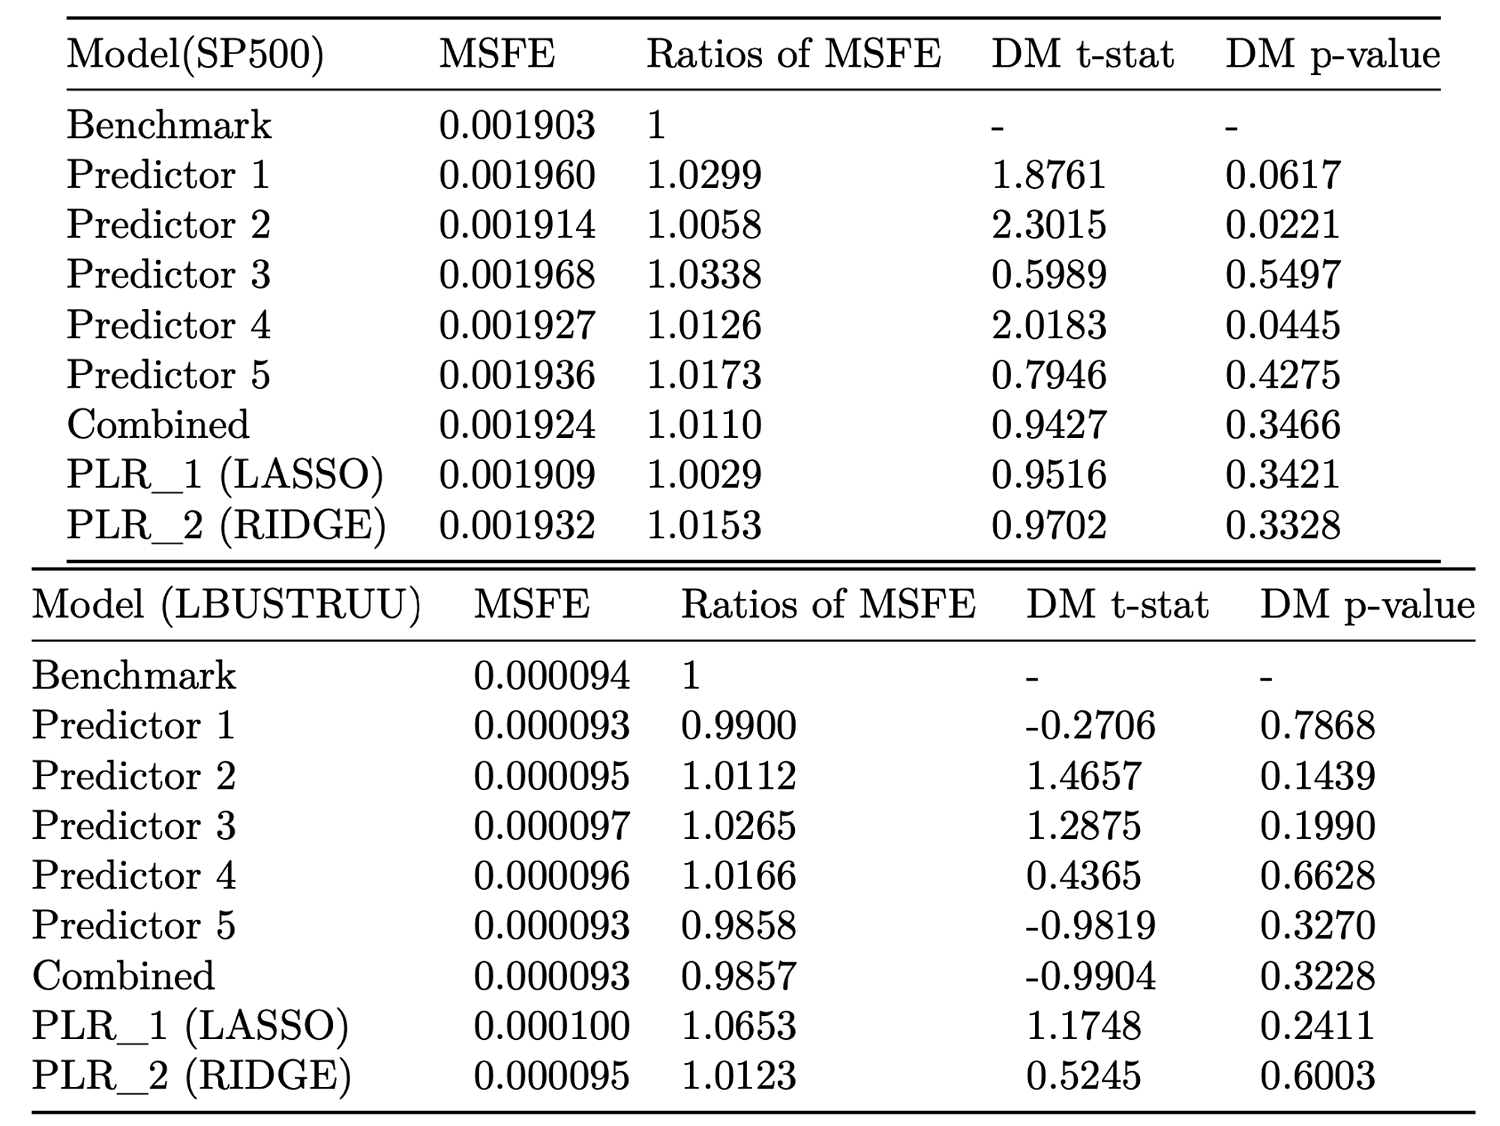 Ratios of MSFE for predictive models relative to benchmark for SP500 and LBUSTRUU